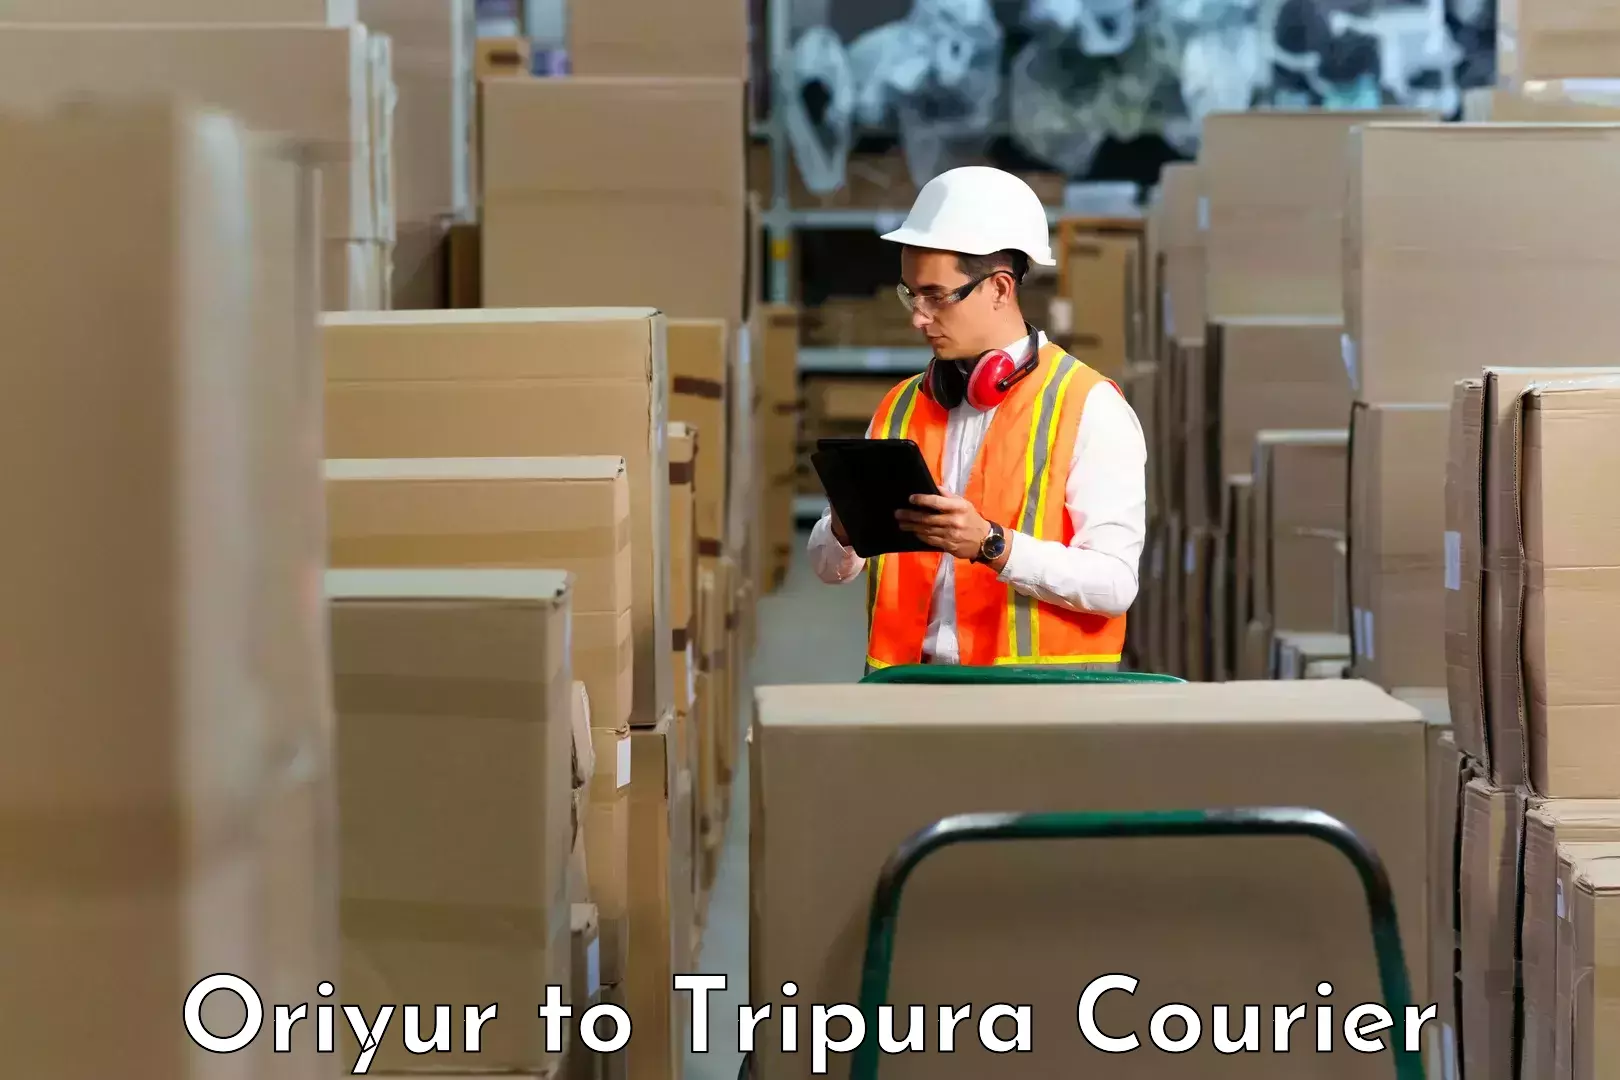 Business delivery service Oriyur to Udaipur Tripura